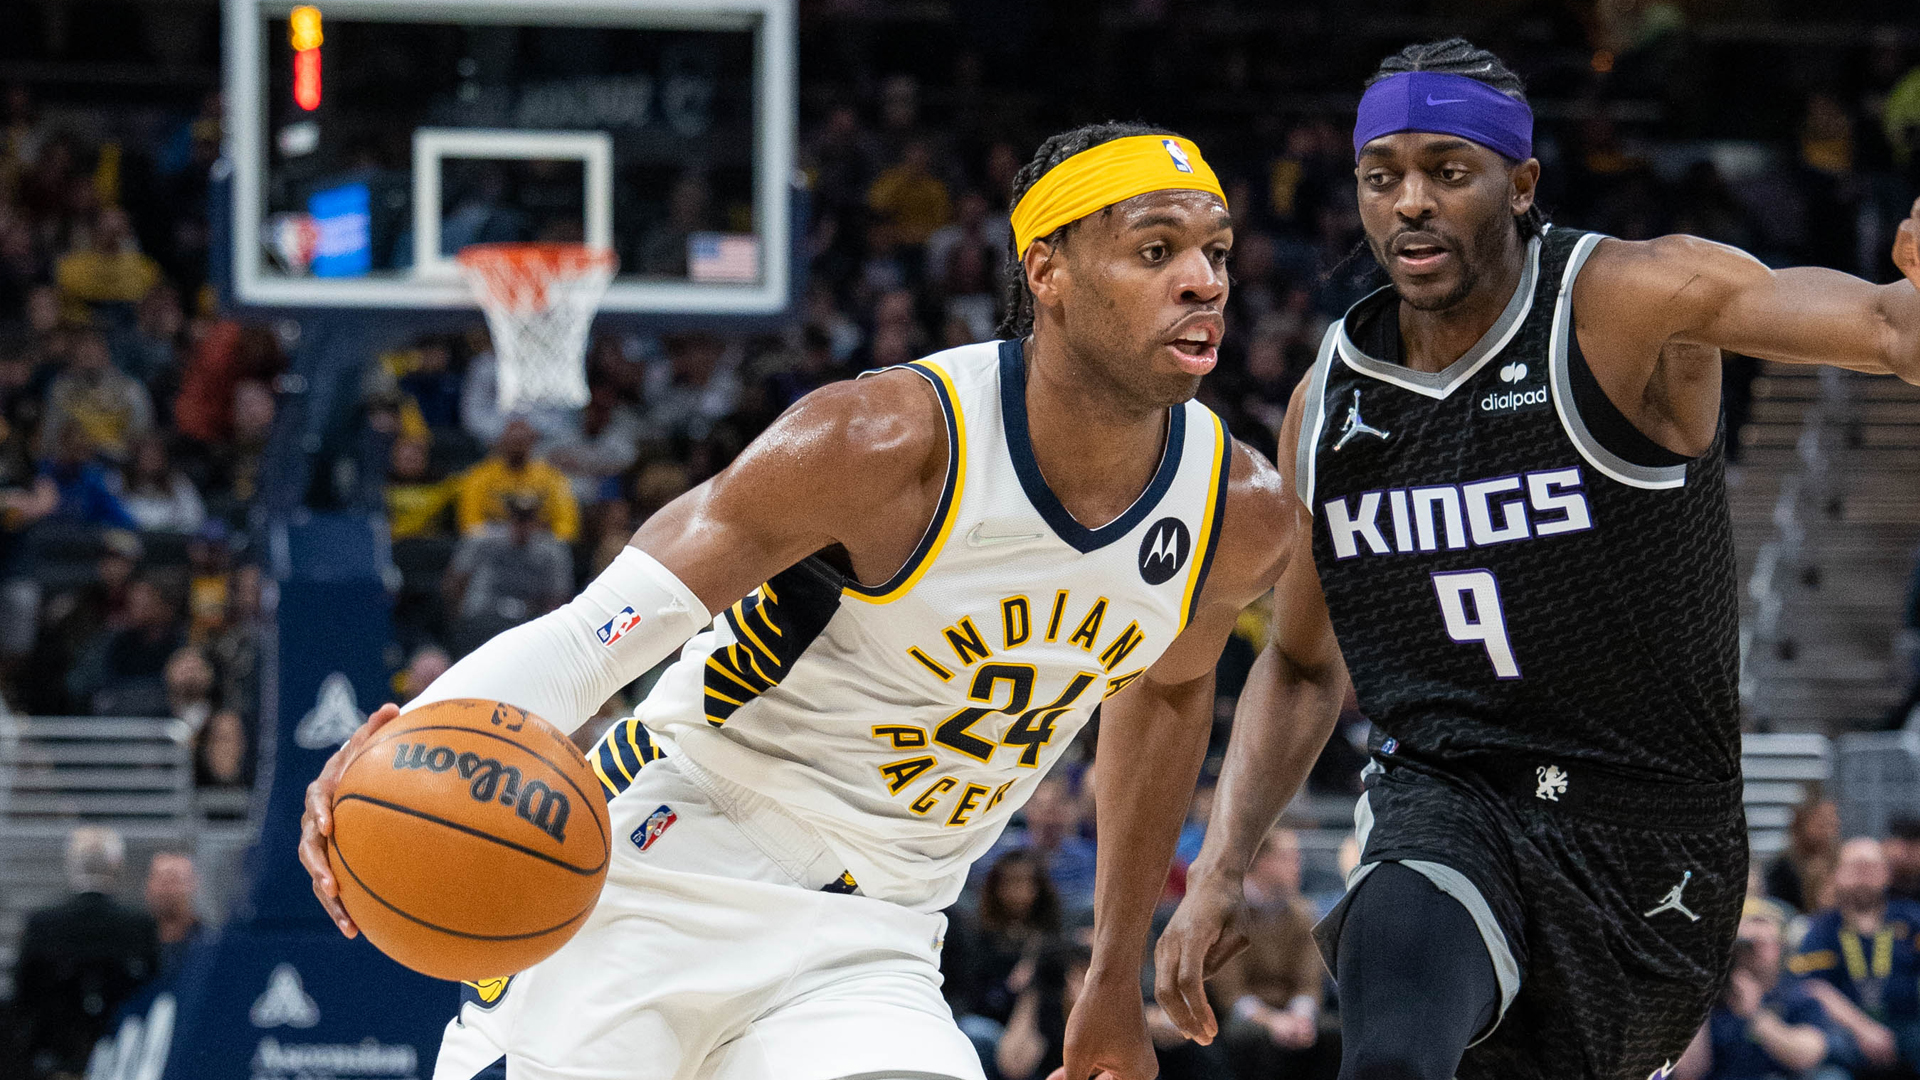 Campaign to Send De'Aaron Fox and Buddy Hield to the All-Star Game